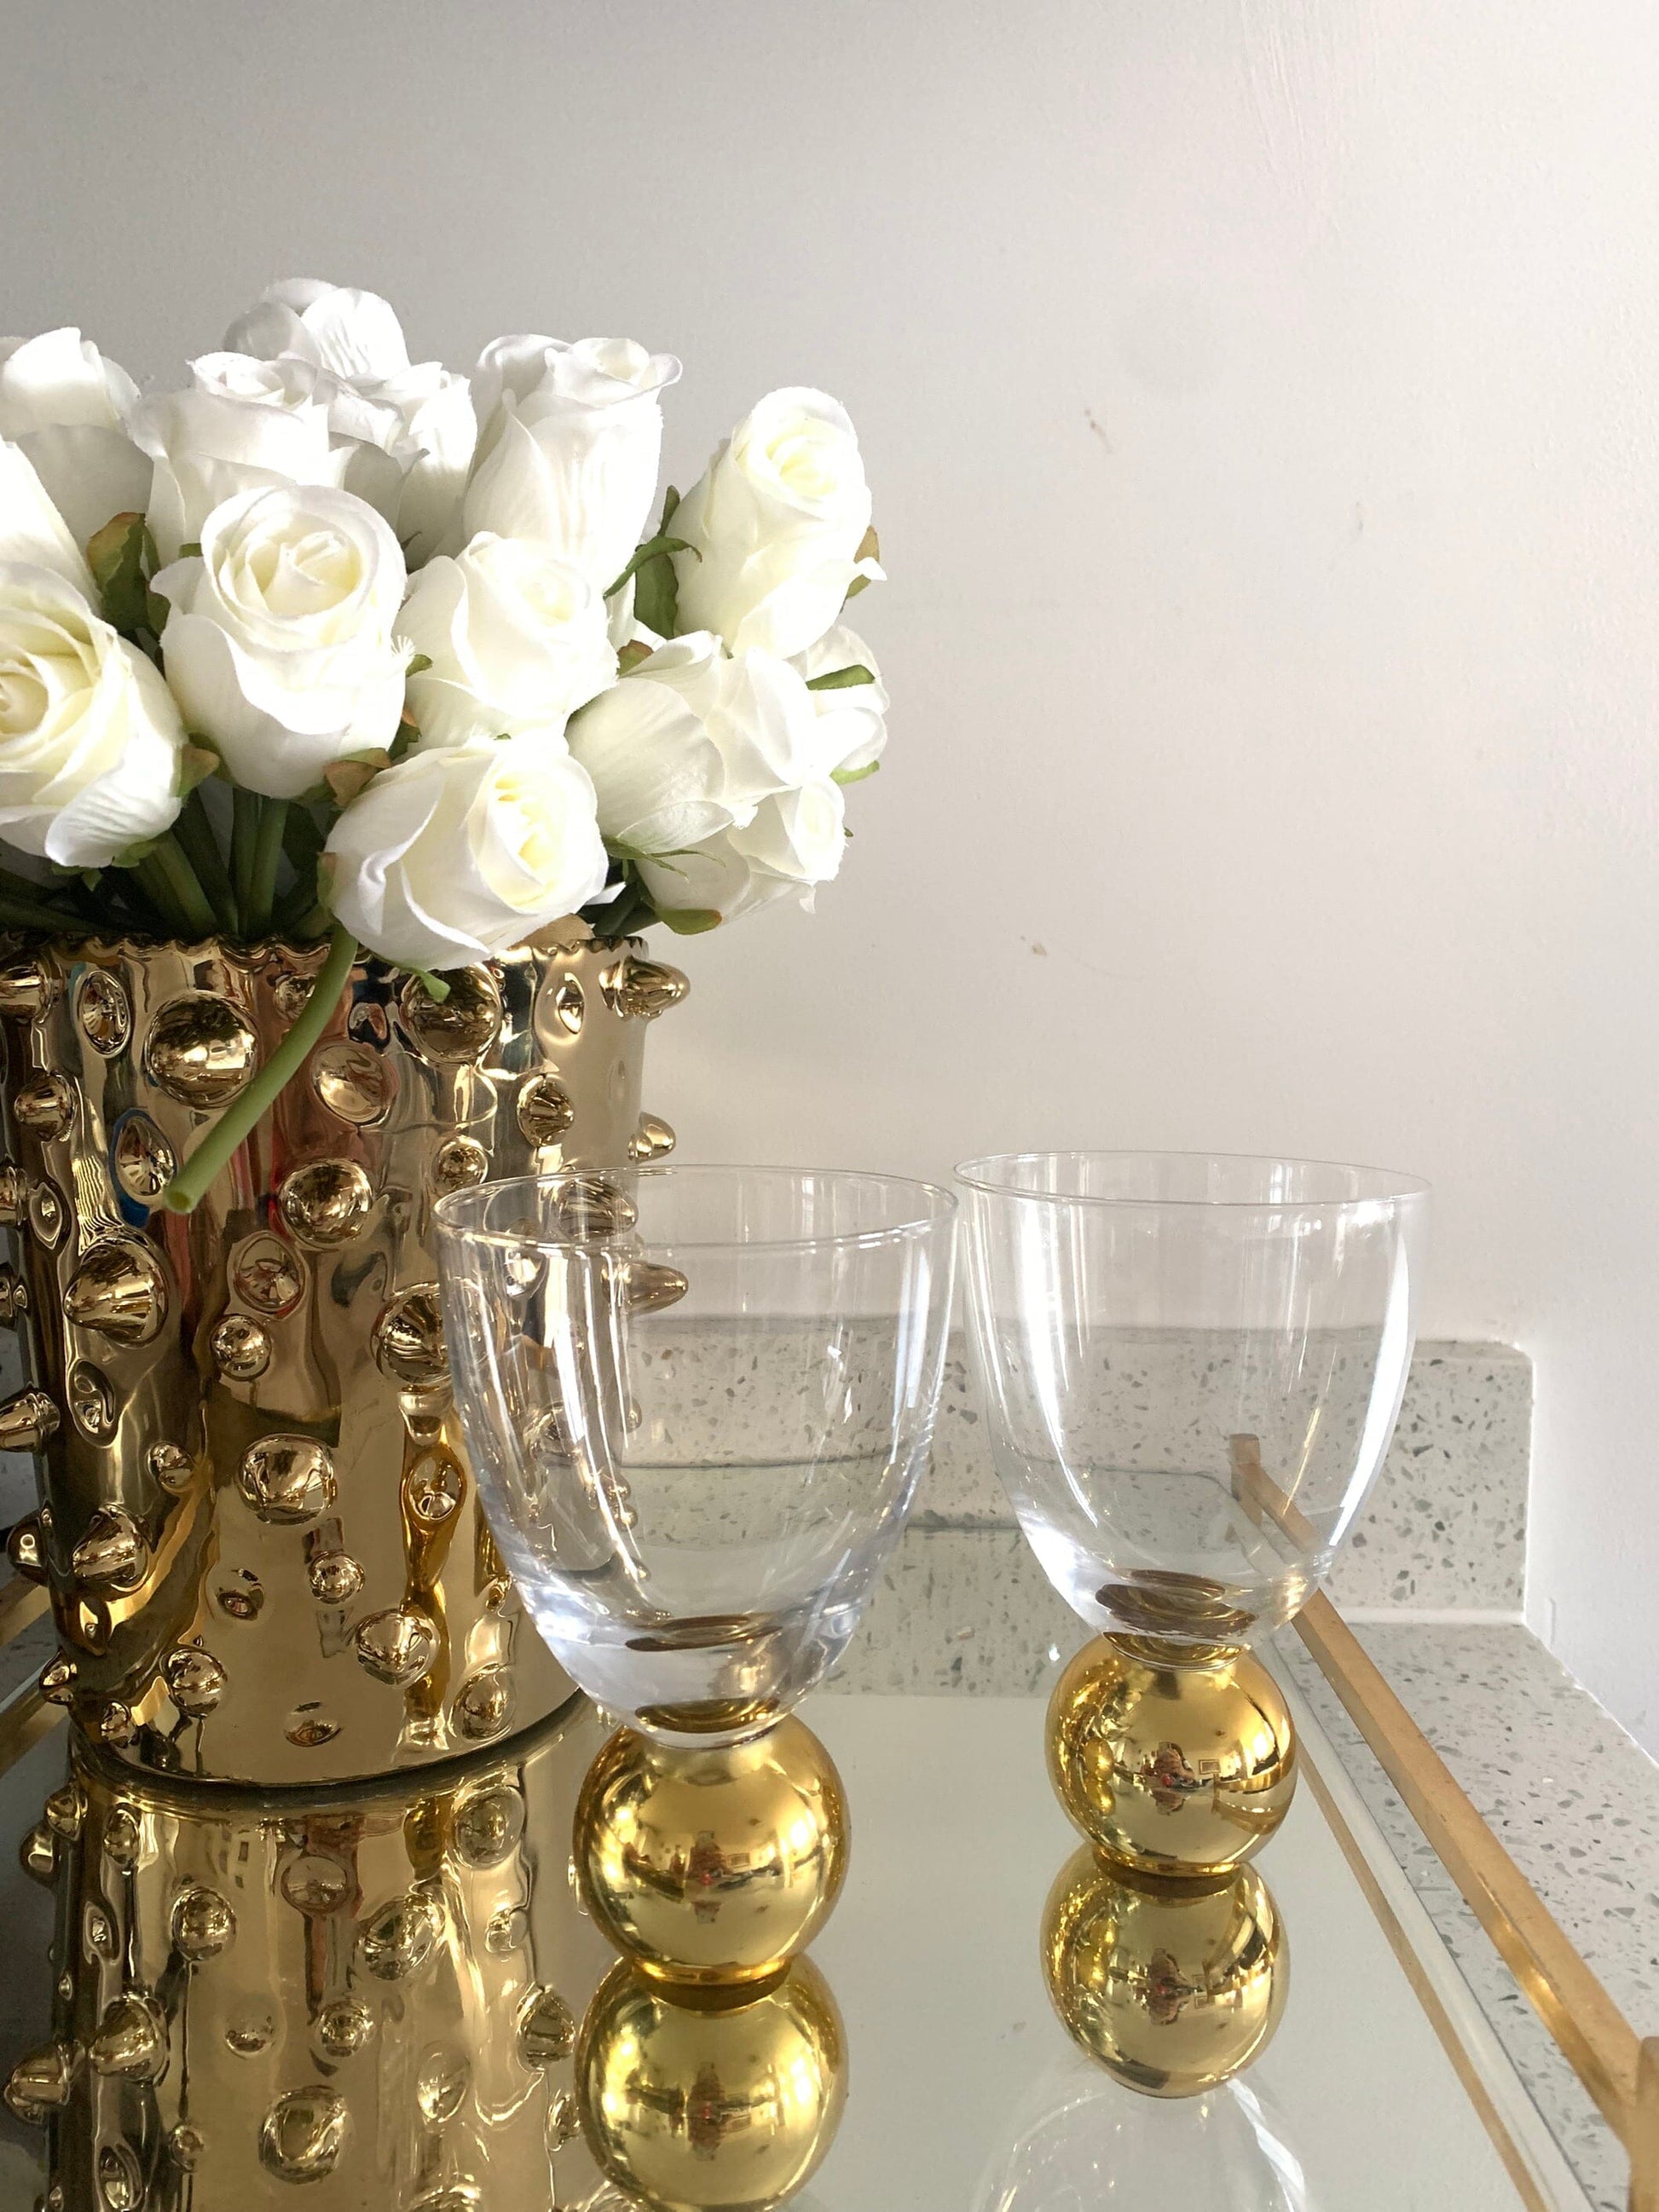 Set of 6 Small Wine Glasses on Gold Ball Pedestal Wine Glasses High Class Touch - Home Decor 